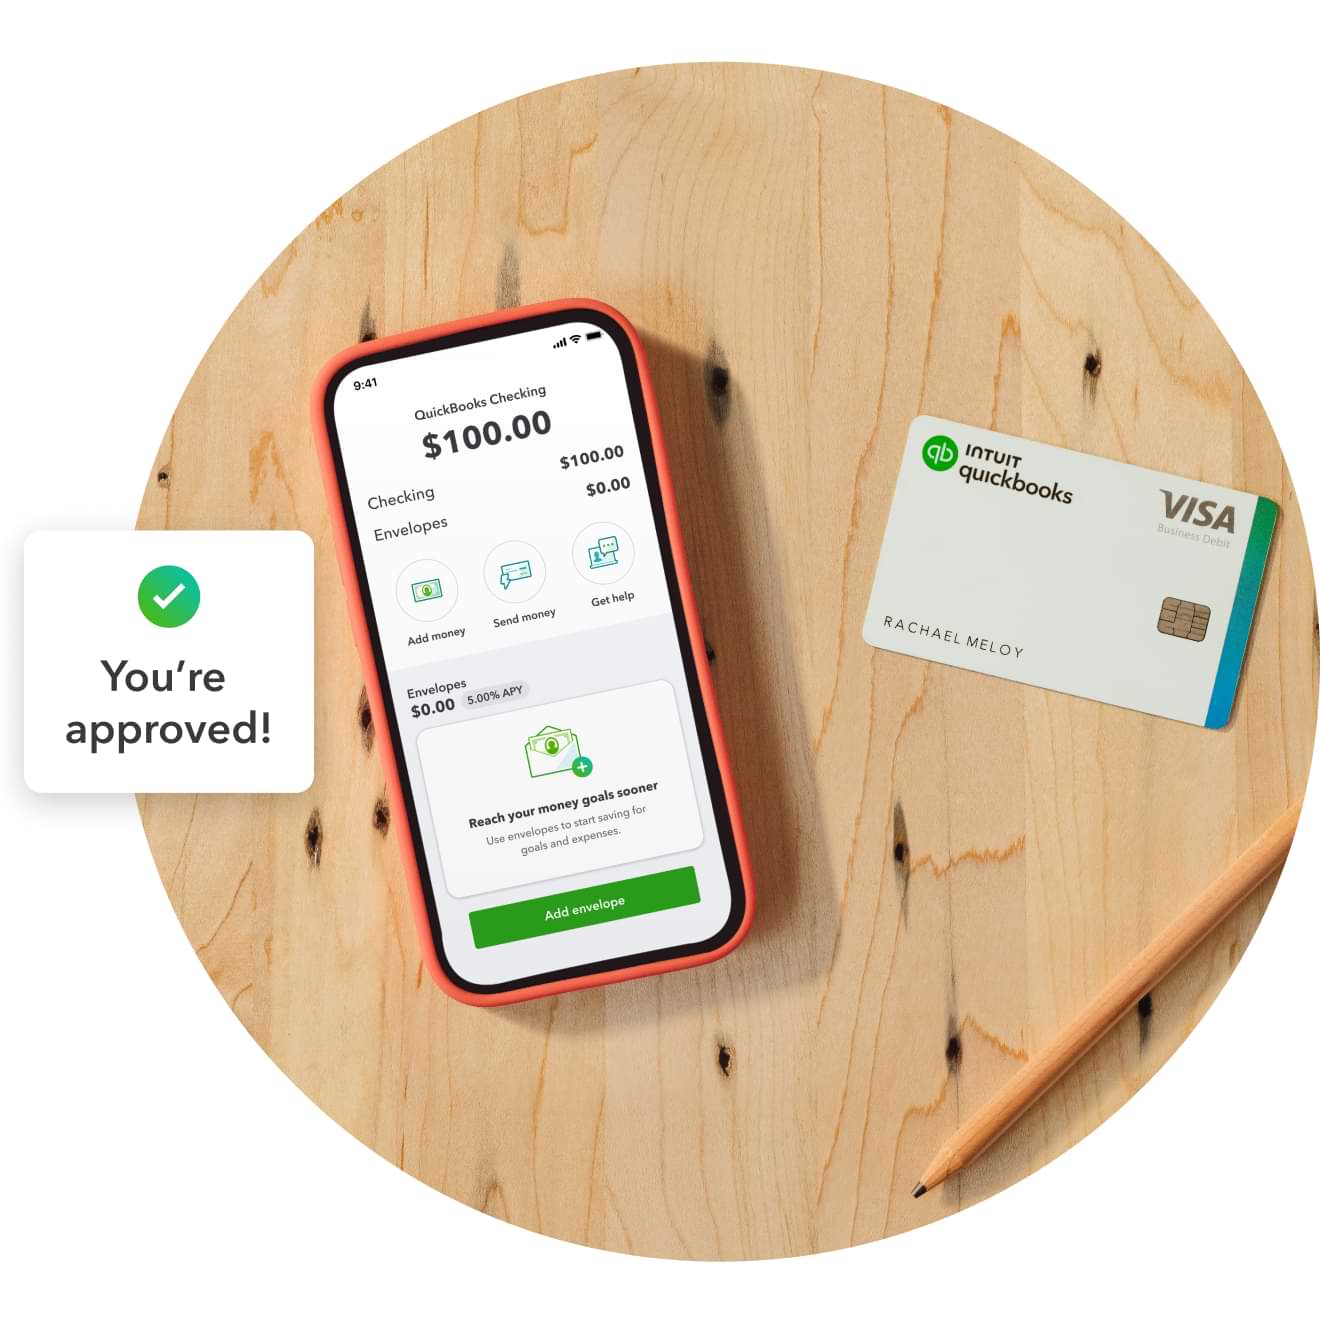 Desk with a QuickBooks debit card and a phone open to a business bank account displaying checking and envelope balances. A notification from QuickBooks reads “you’re approved!”